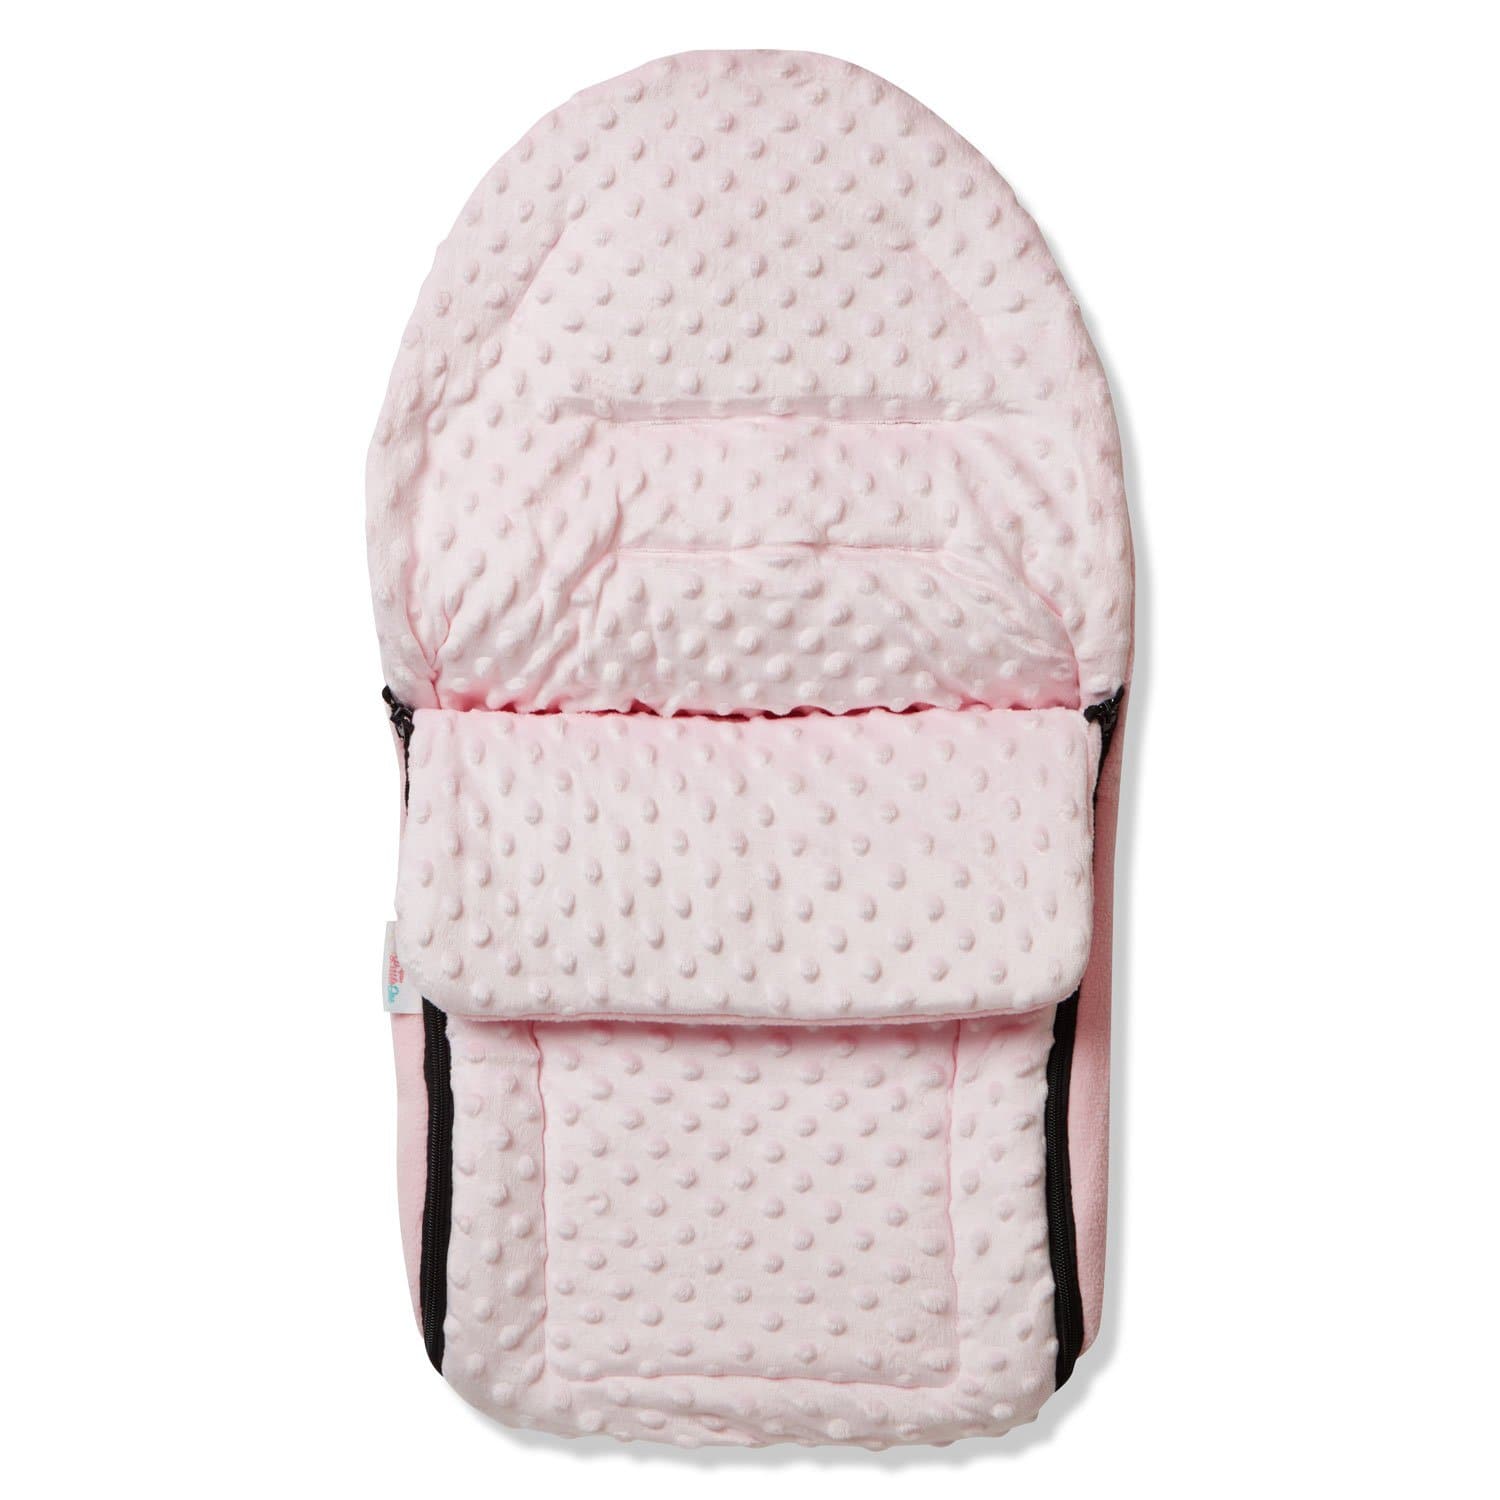 Universal Dimple Car Seat Footmuff / Cosy Toes - Fits All 3 And 5 Point Harnesses - For Your Little One